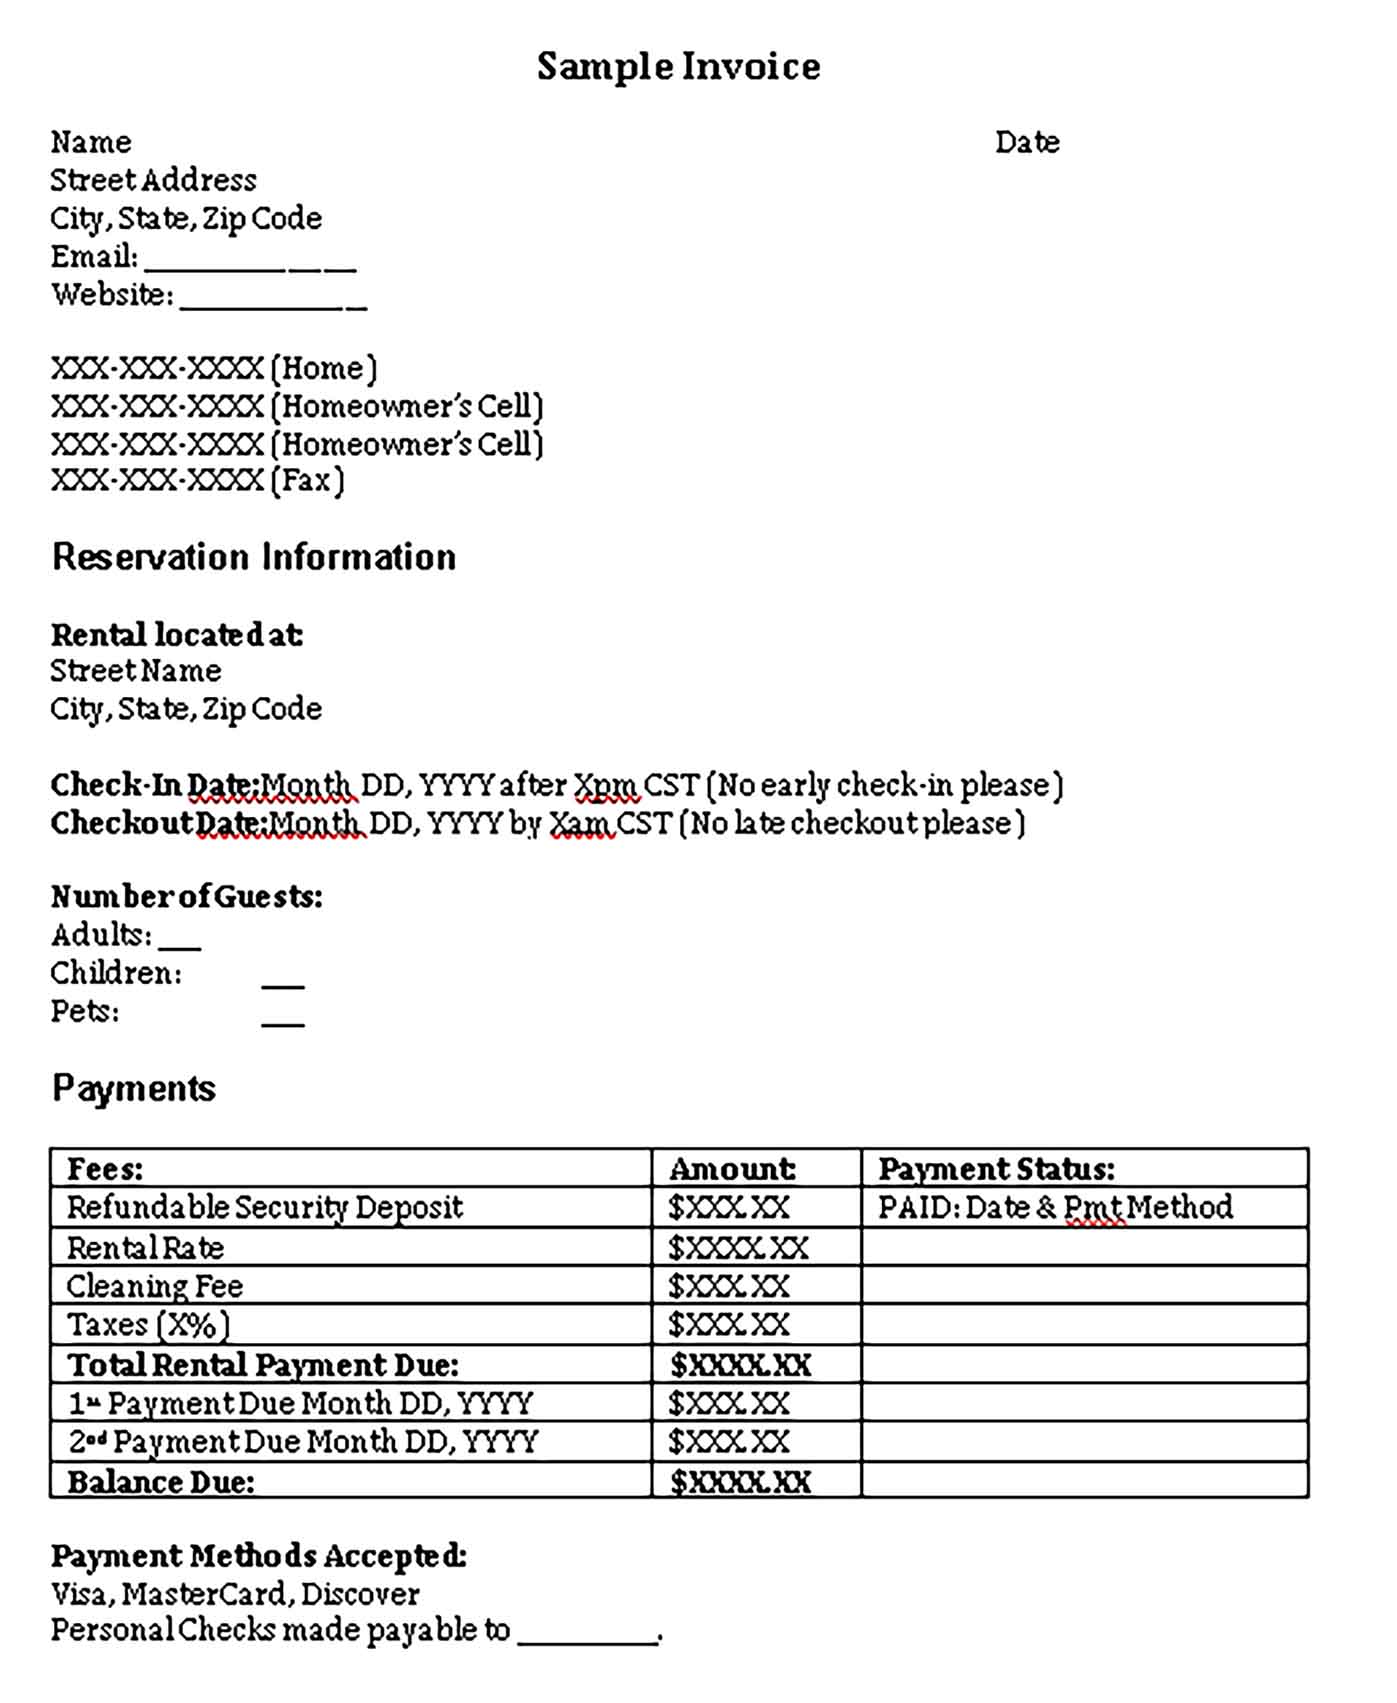 Sample Receipt for Vacation Rental Booking Templates